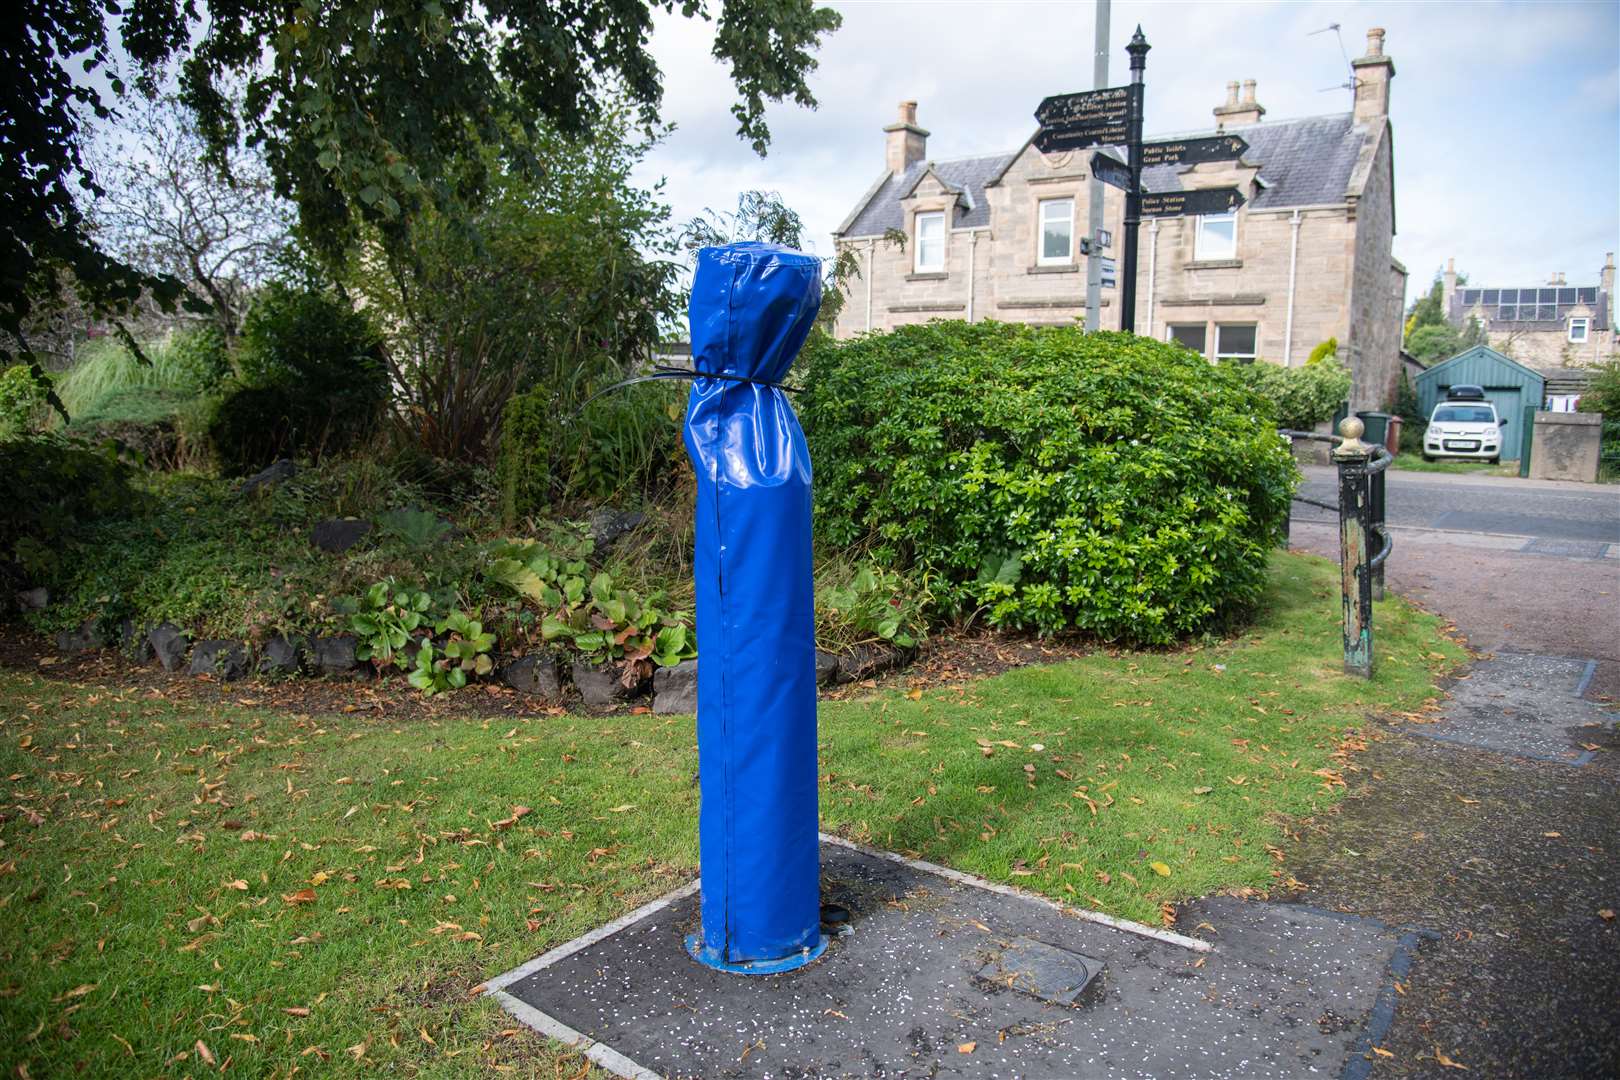 The Scottish Water tap at Grant Park has been covered and tie wrapped since July.